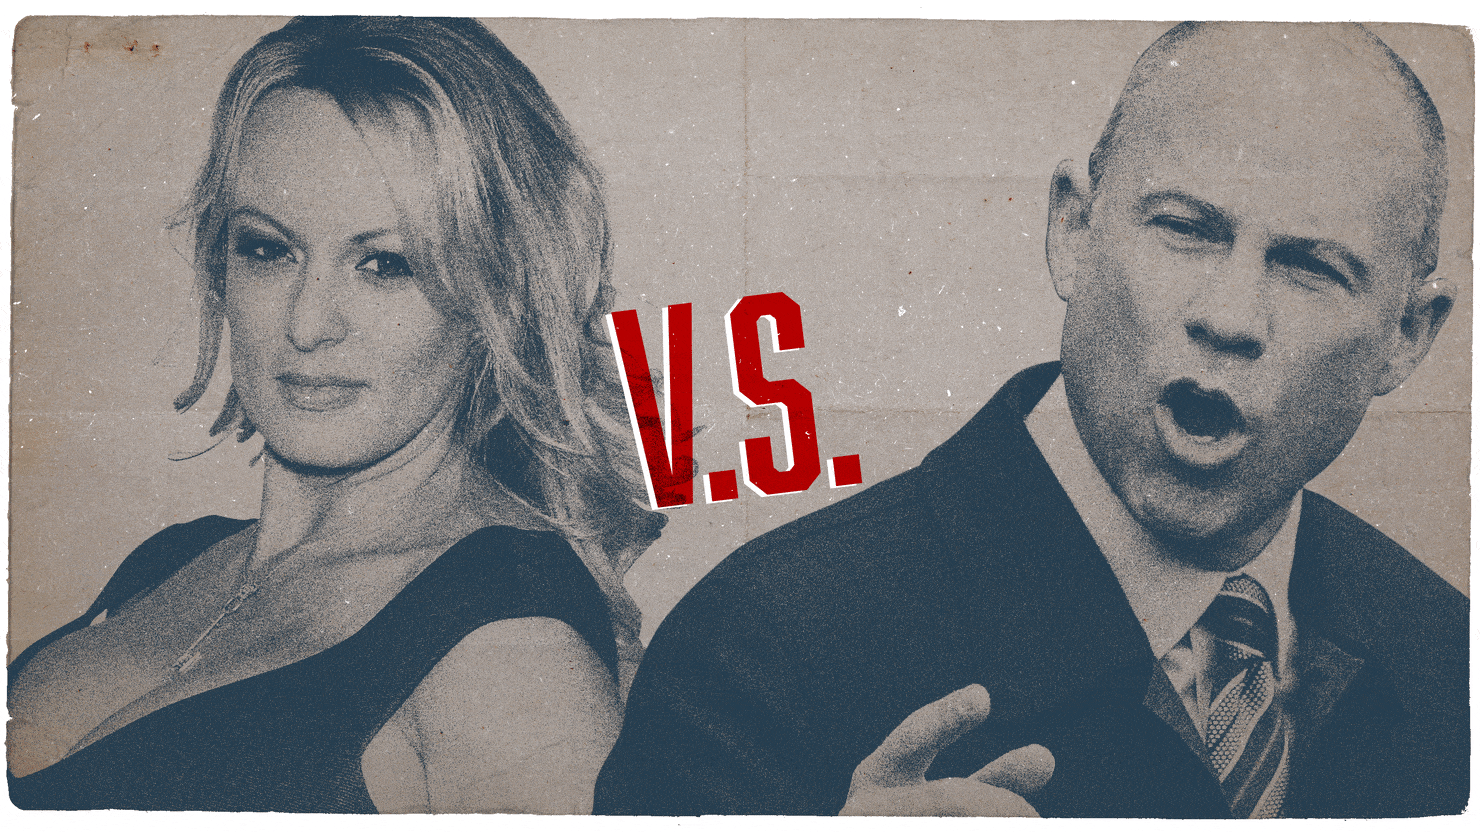 Michael Avenatti Takes Stormy Daniels To Court For Millions In Legal